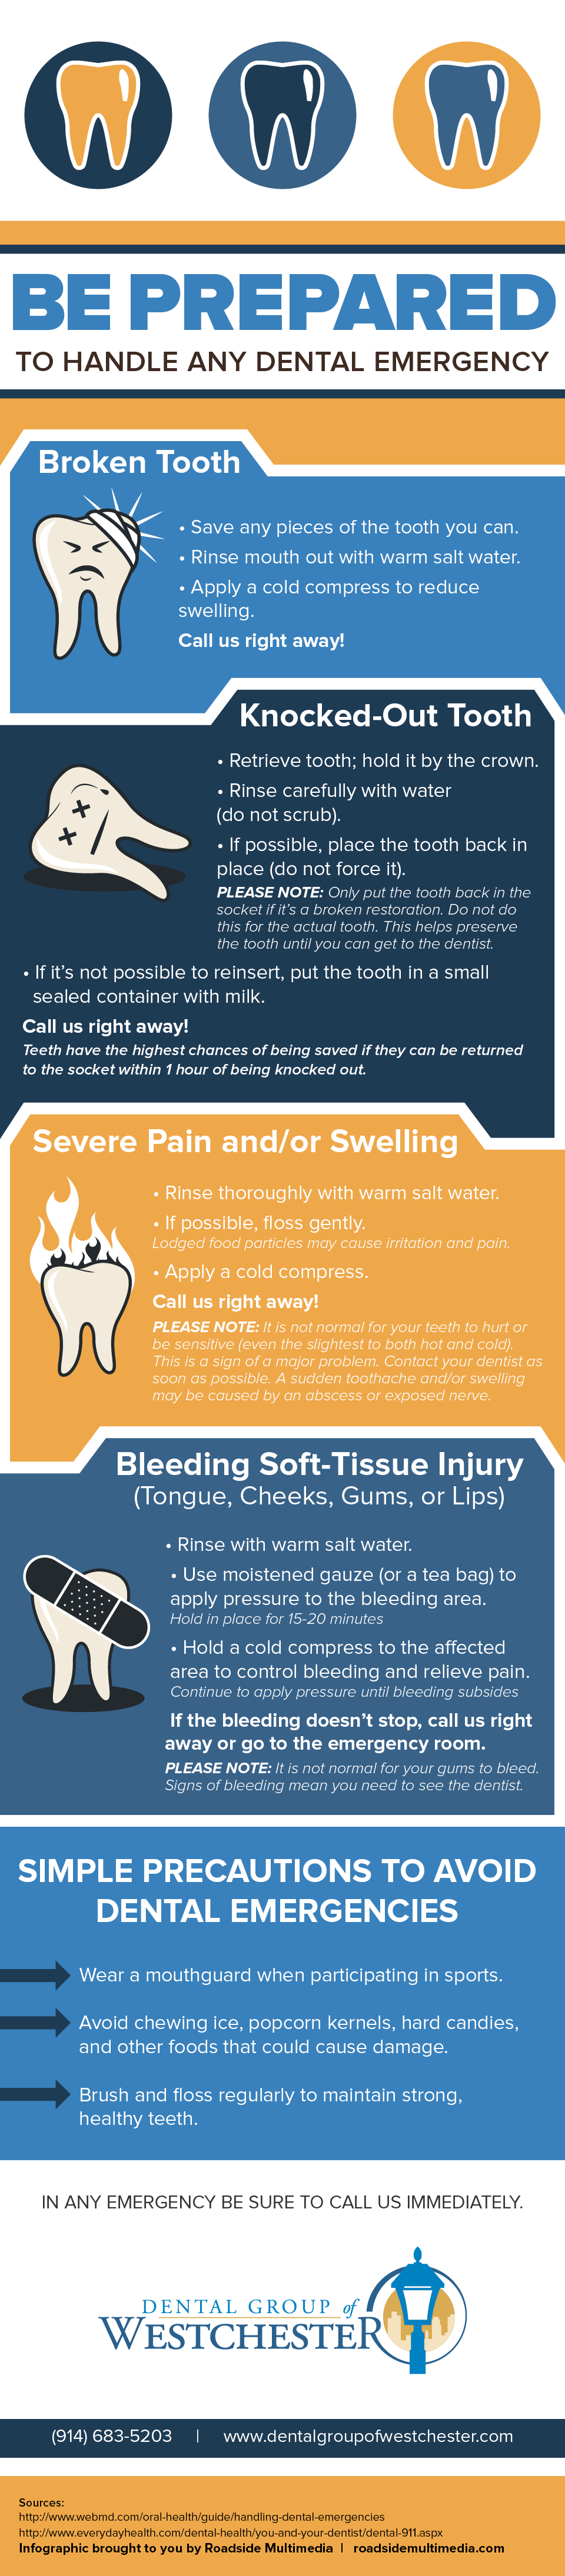 Infographic explaining how to handle dental emergencies and call Dental Group of Westchester